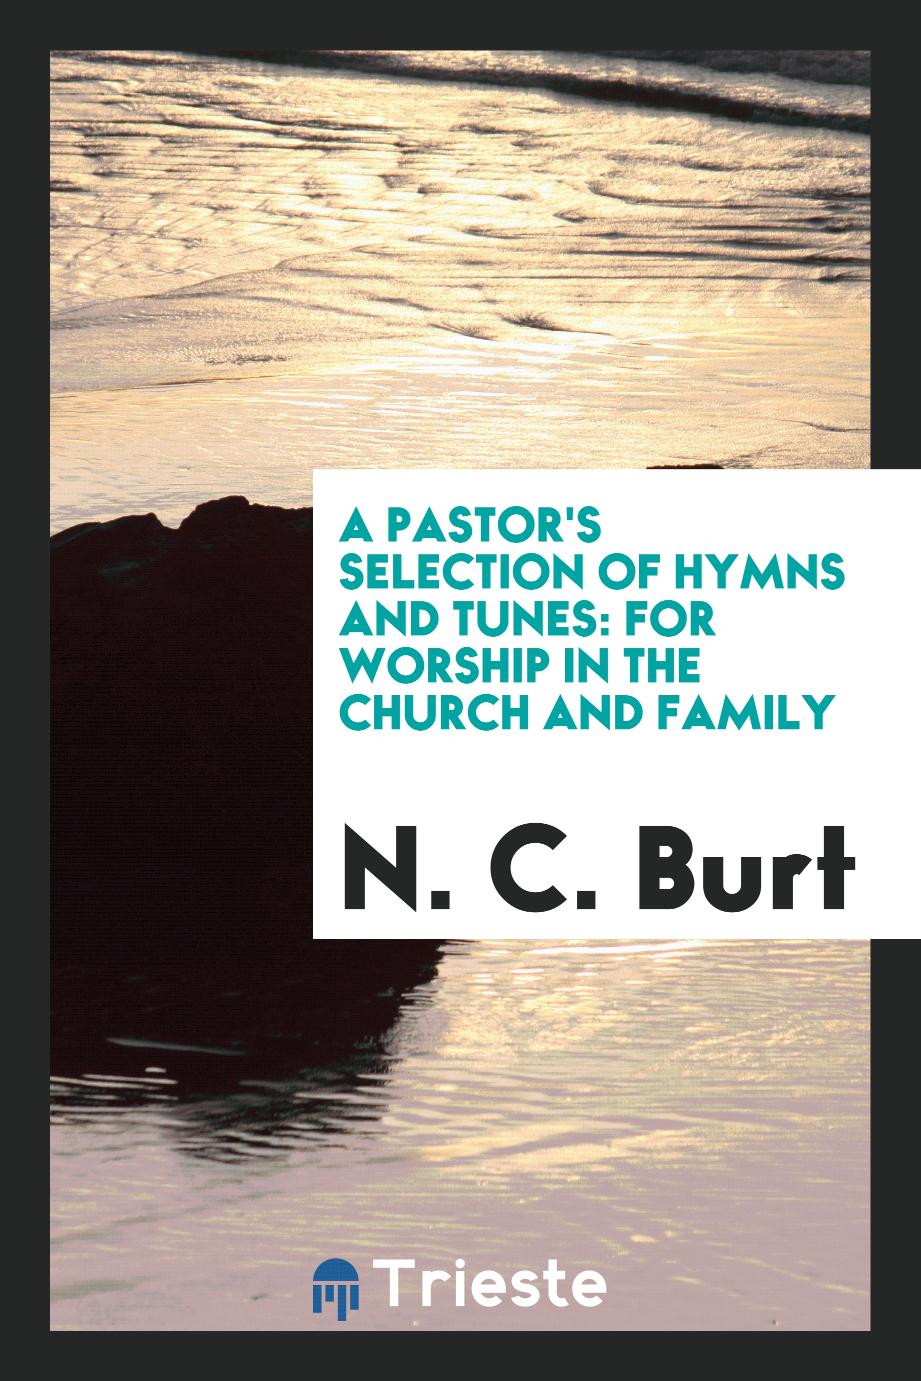 A Pastor's Selection of Hymns and Tunes: For Worship in the Church and Family